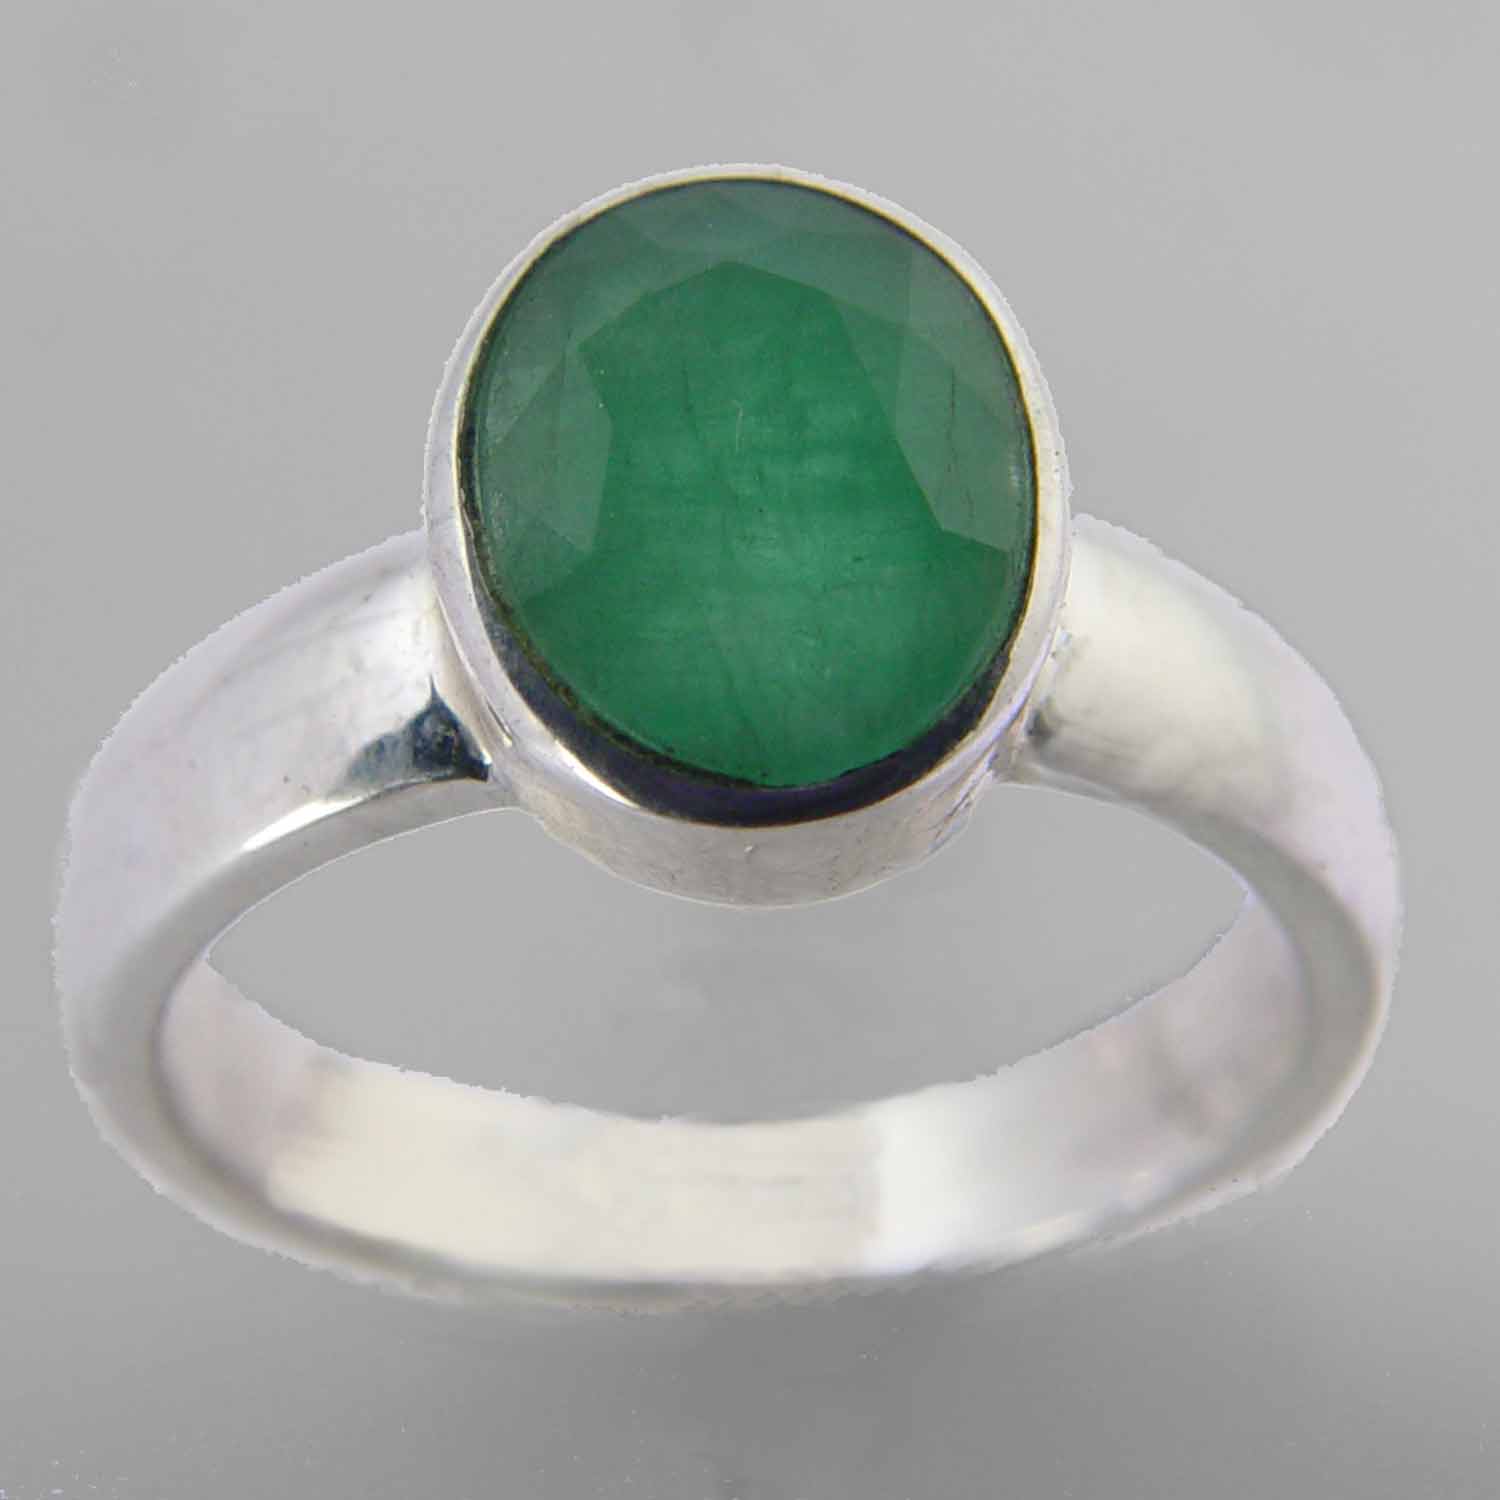 Emerald 2.7 ct Oval Bezel Set Sterling Silver Ring, Size 7